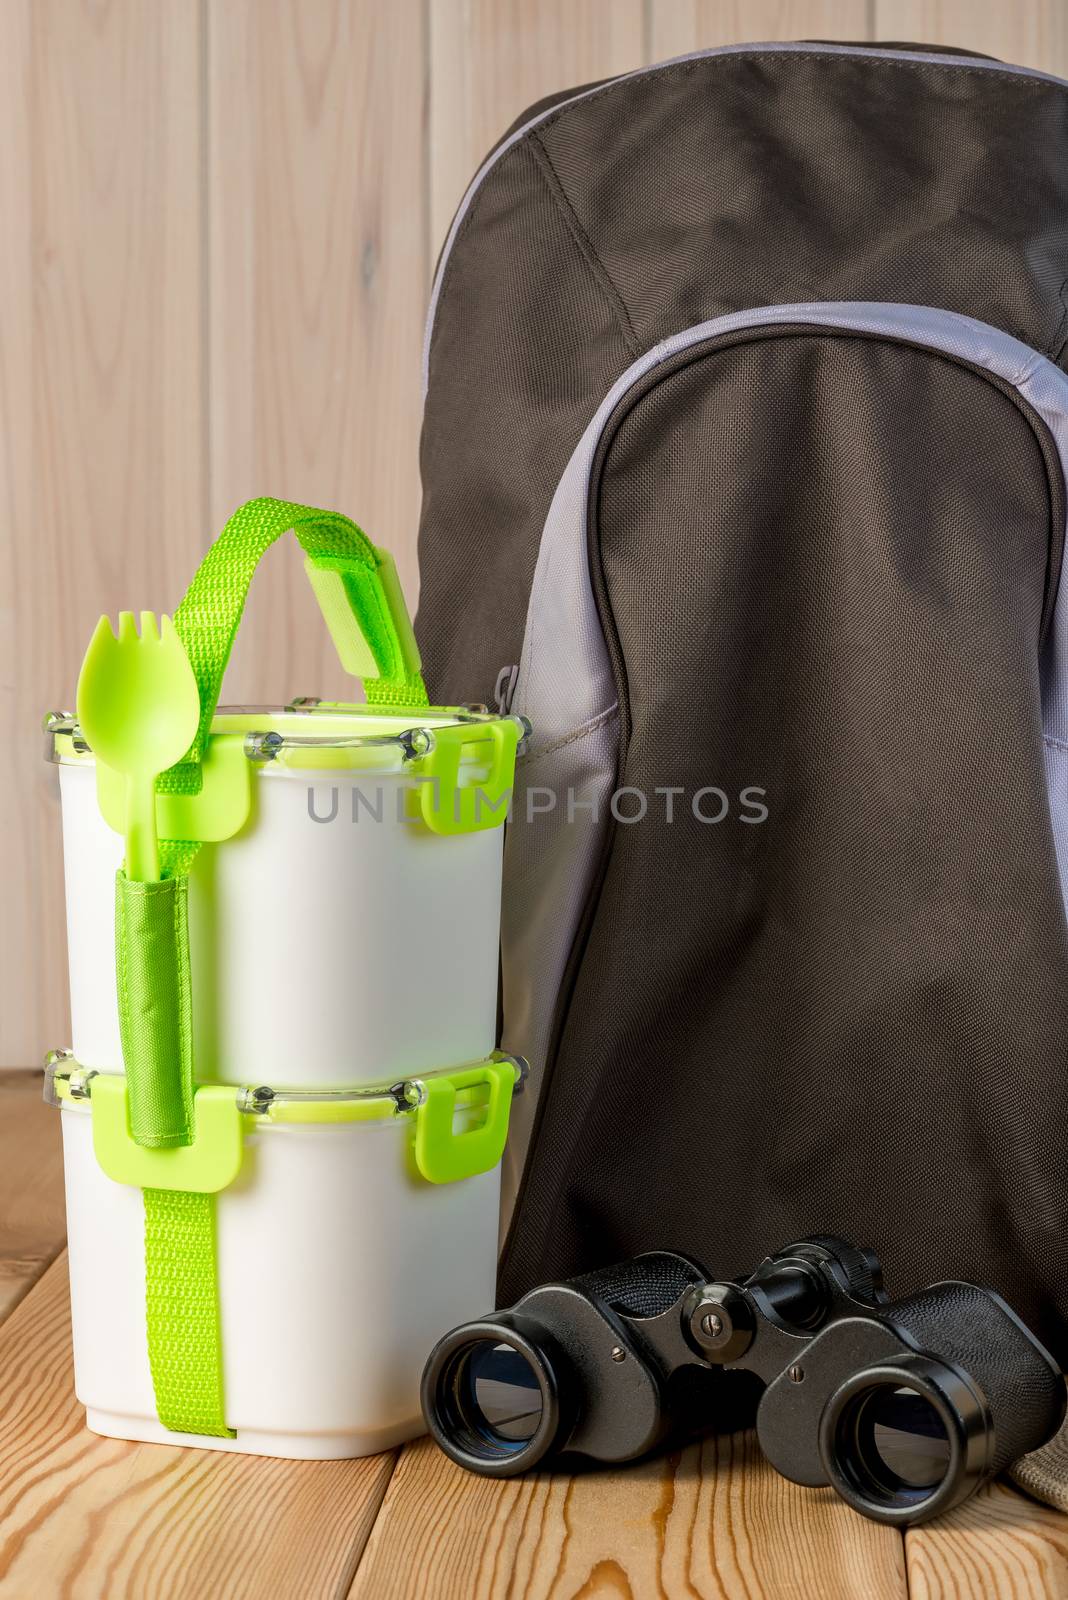 objects for a picnic in nature - backpack, binoculars and food containers